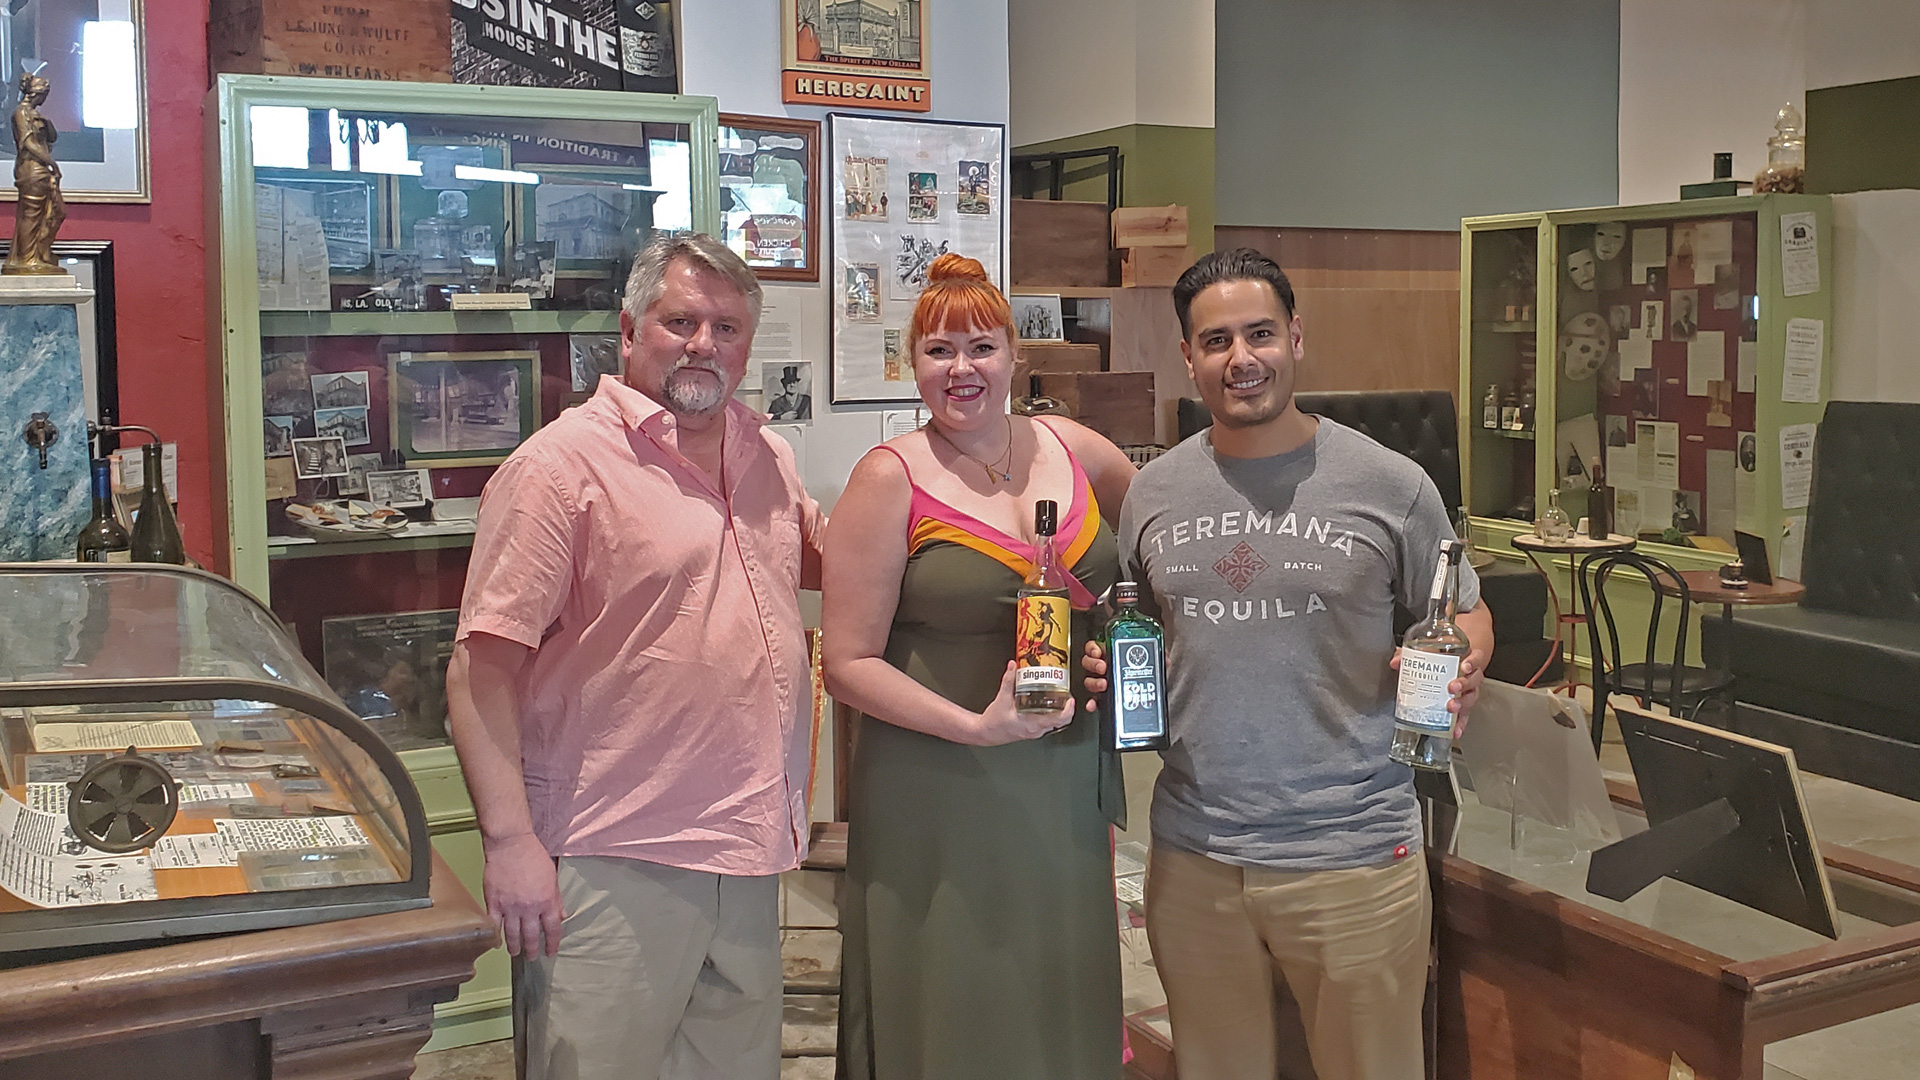 The NOLADrinks Show with Bryan Dias – Local Brand Ambassadors – 2021Ep14 – Bryan Dias of The NOLADrinks Show, Katie Firestone of Singani 63, and Ranh Nunez of Jägermeister USA at The Southern Food and Beverage Museum.